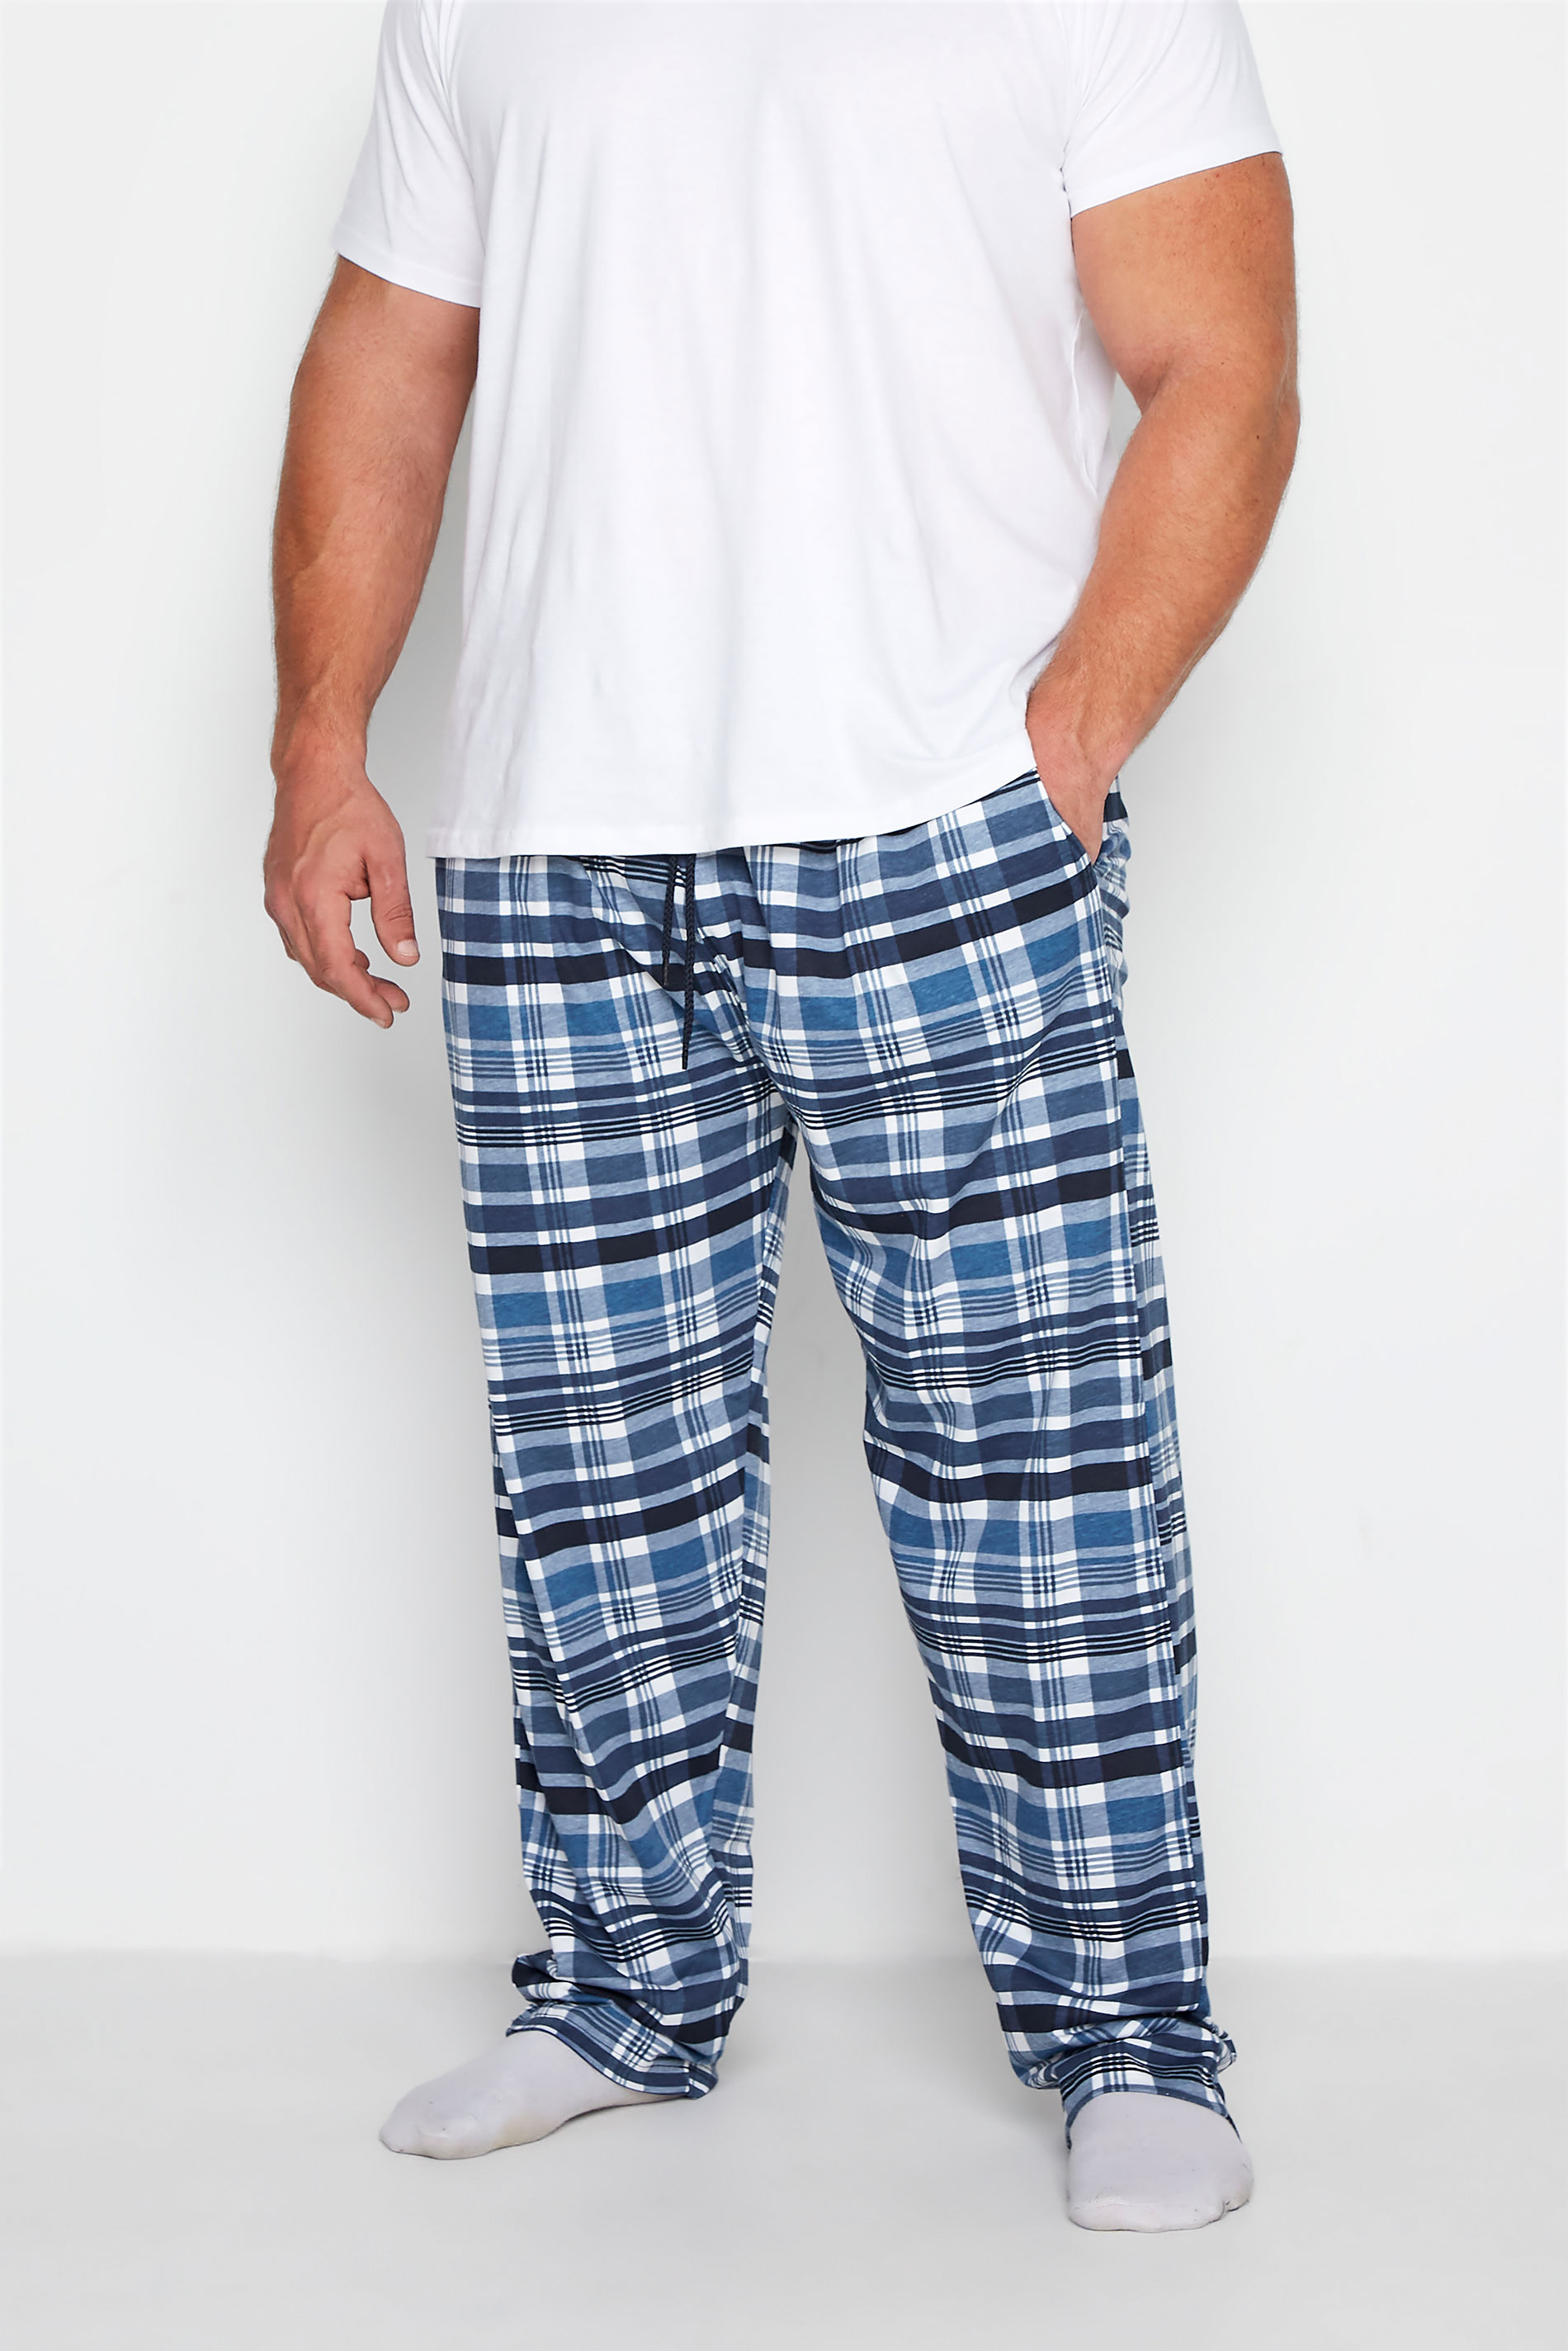 KAM Big & Tall 2 PACK Navy Blue Check Lounge Bottoms 1